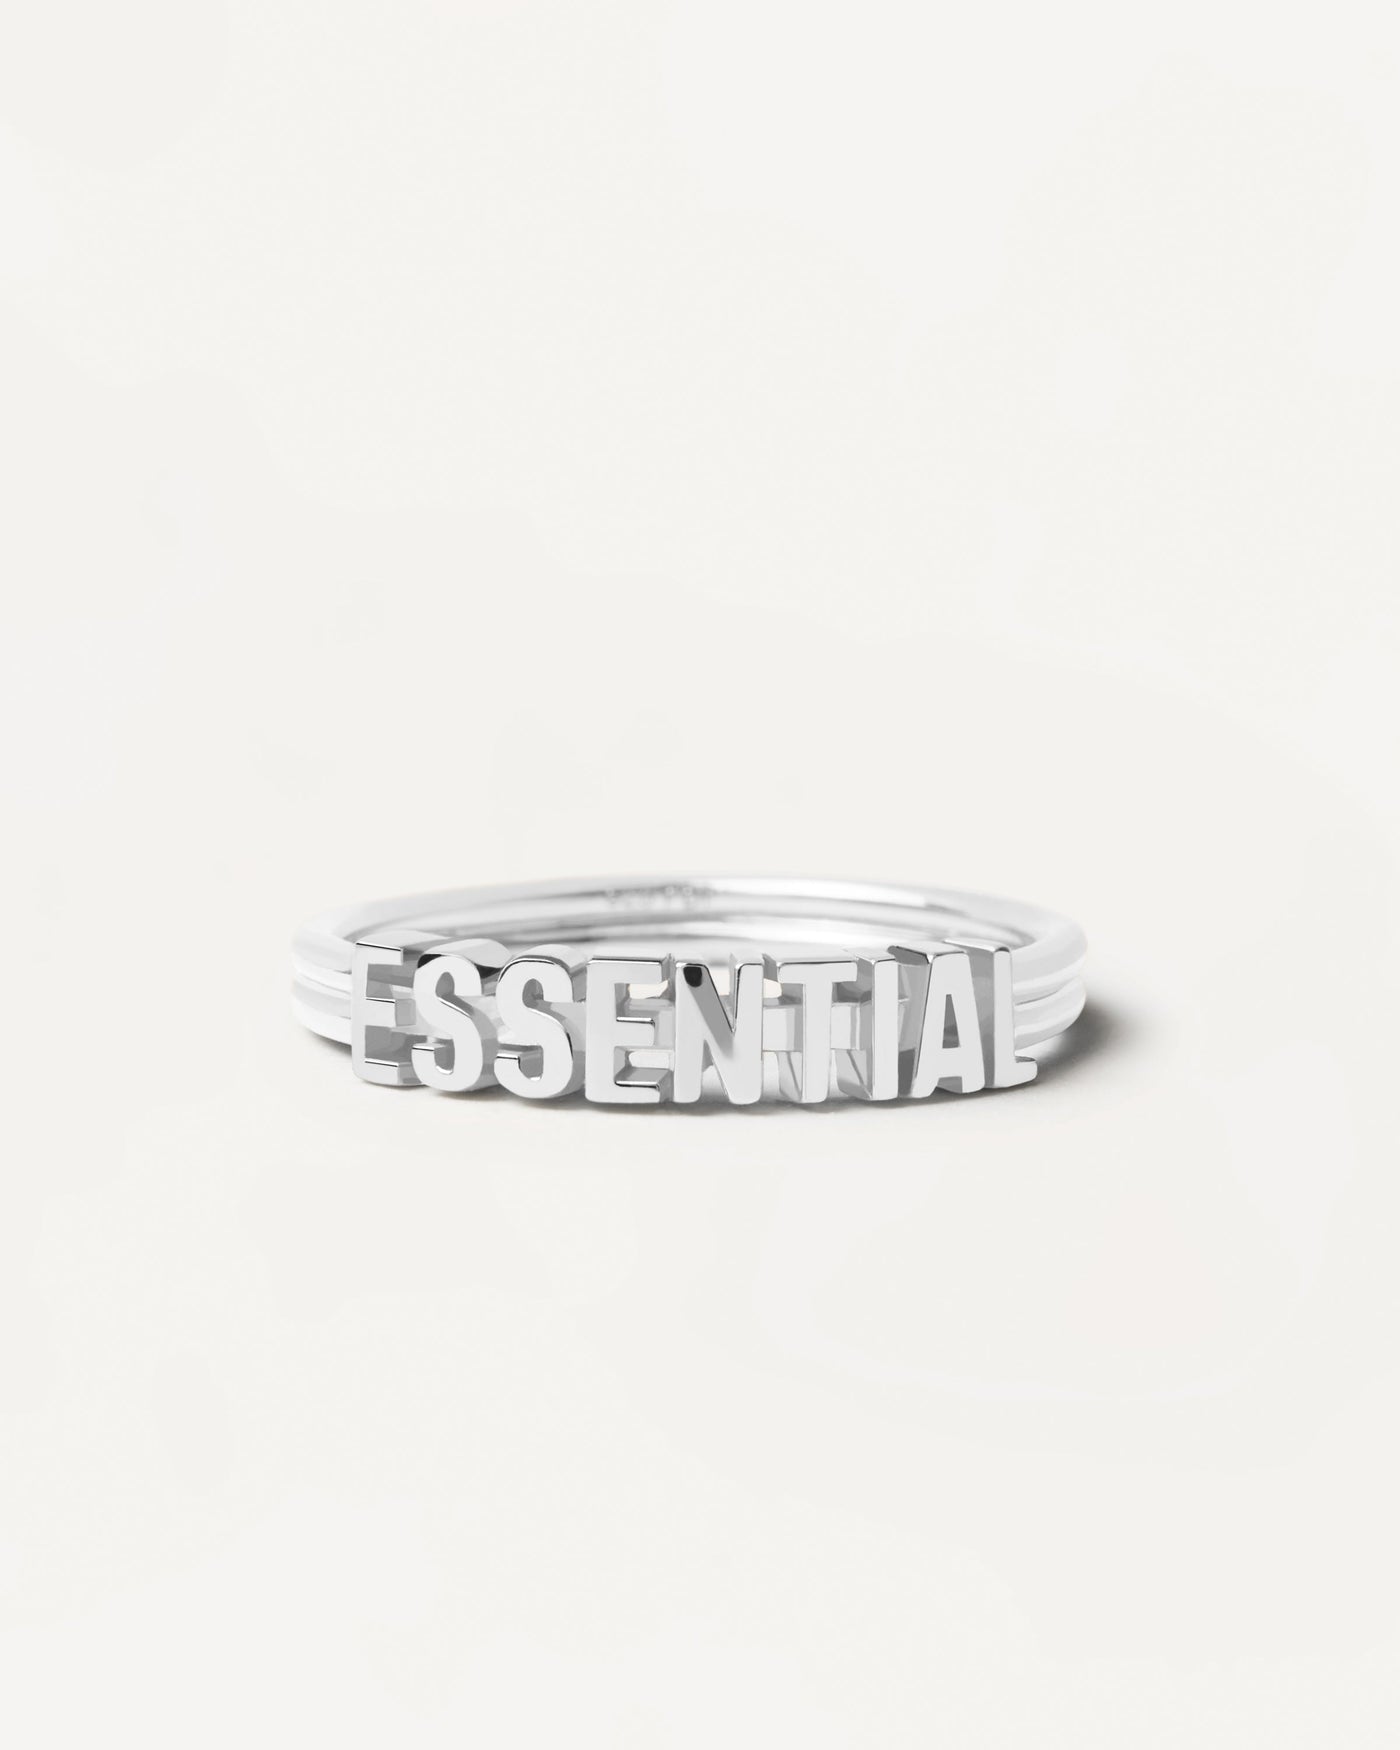 2023 Selection | Essential Silver Ring. Essential claim ring in sterling silver with 3 bands design. Get the latest arrival from PDPAOLA. Place your order safely and get this Best Seller. Free Shipping.